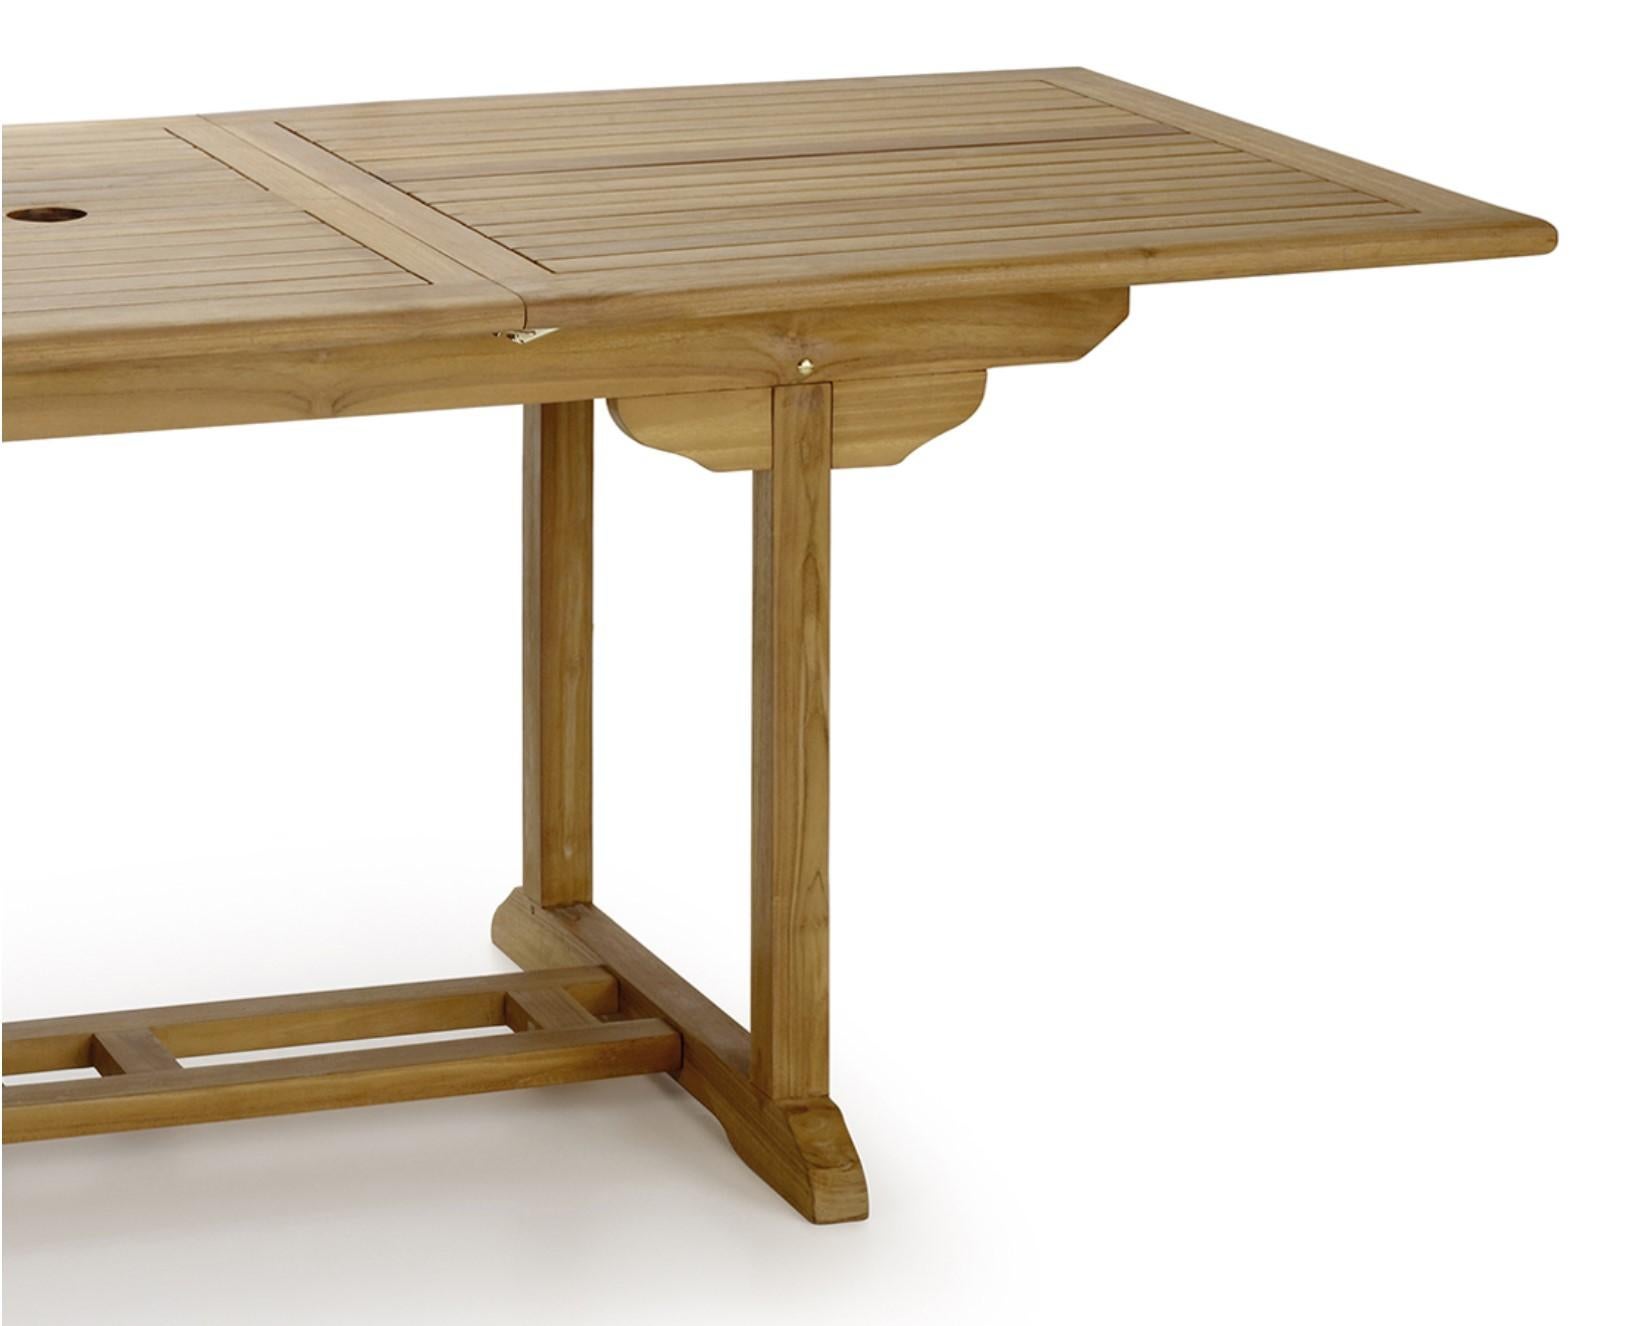 Modern New Teak Rectangular Foldable Dining Table, Indoor and Outdoor For Sale